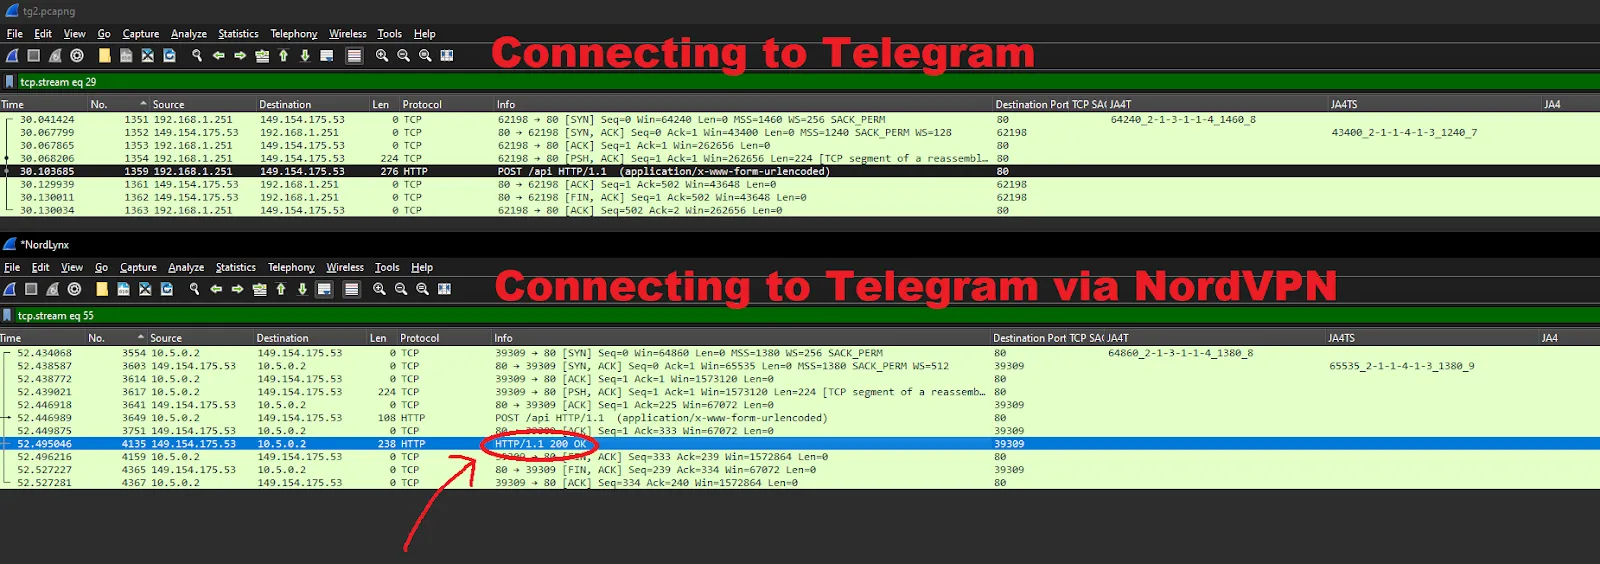 We found that both Surfshark and NordVPN route certain ports through TCP proxies such as port 5060, which is only used for unencrypted phone calls. No